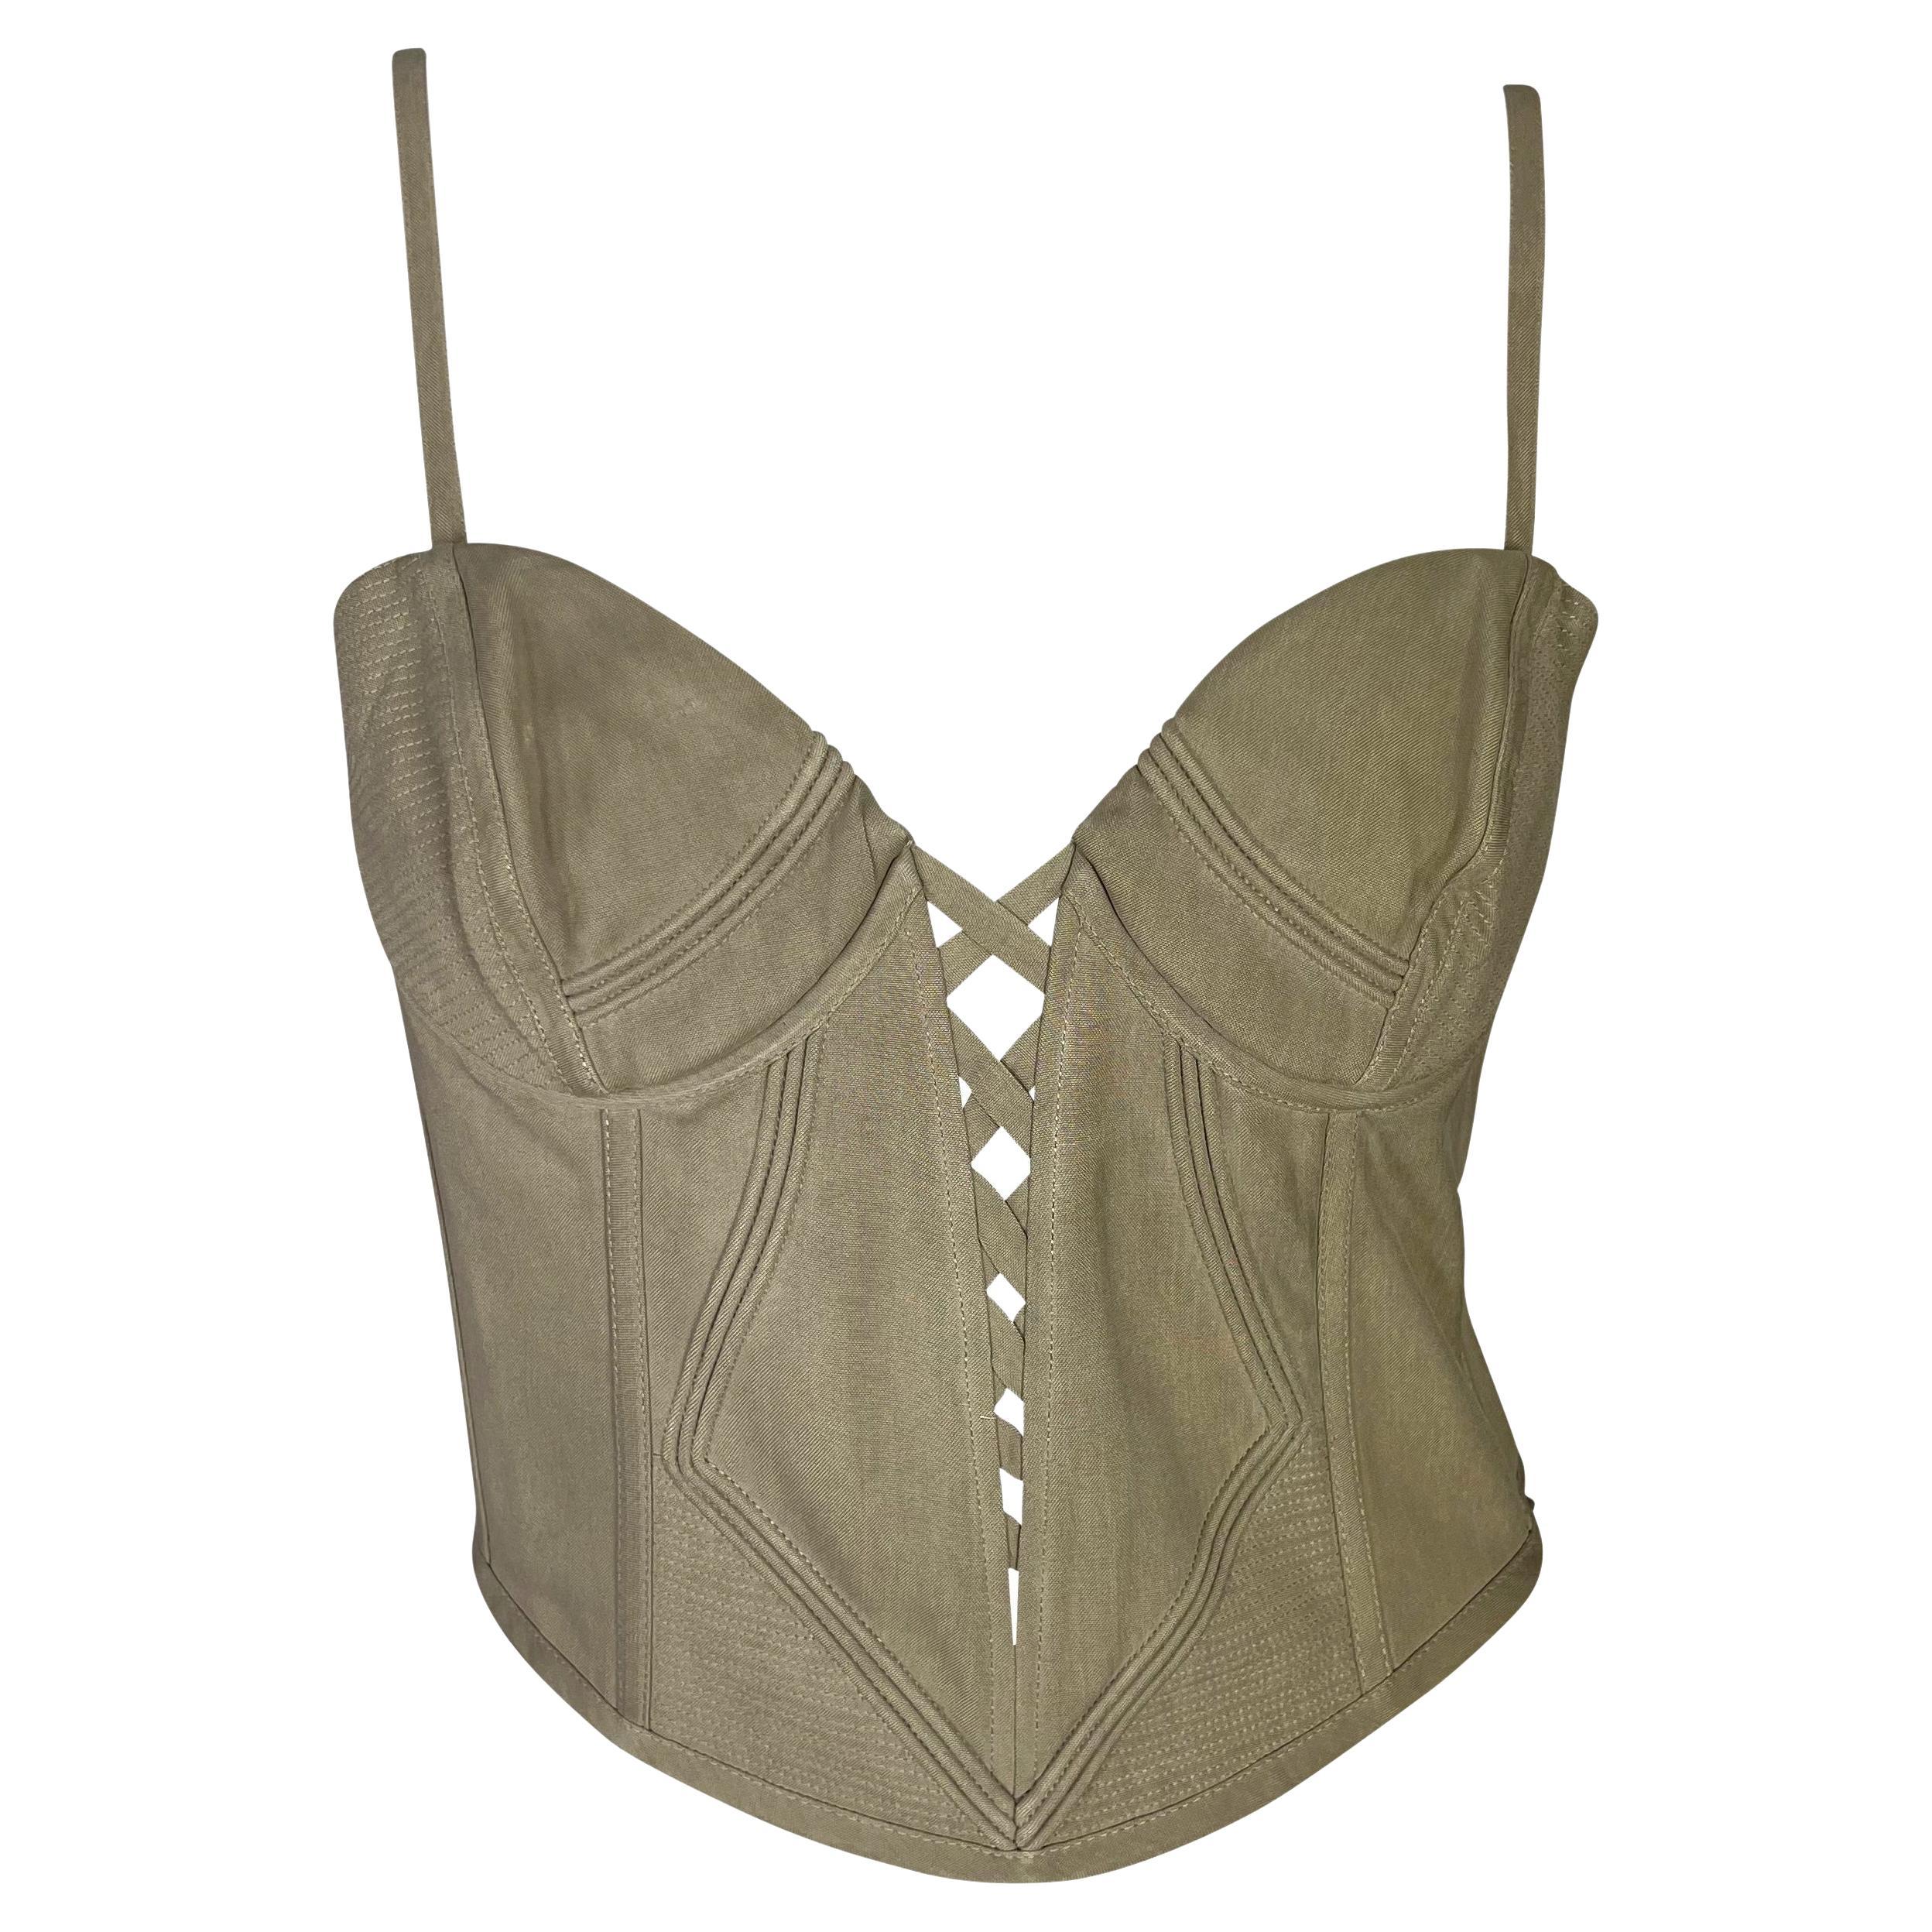 S/S 1995 Gianni Versace Couture Plunging Corset Beige Silk Bustier Crop Top For Sale